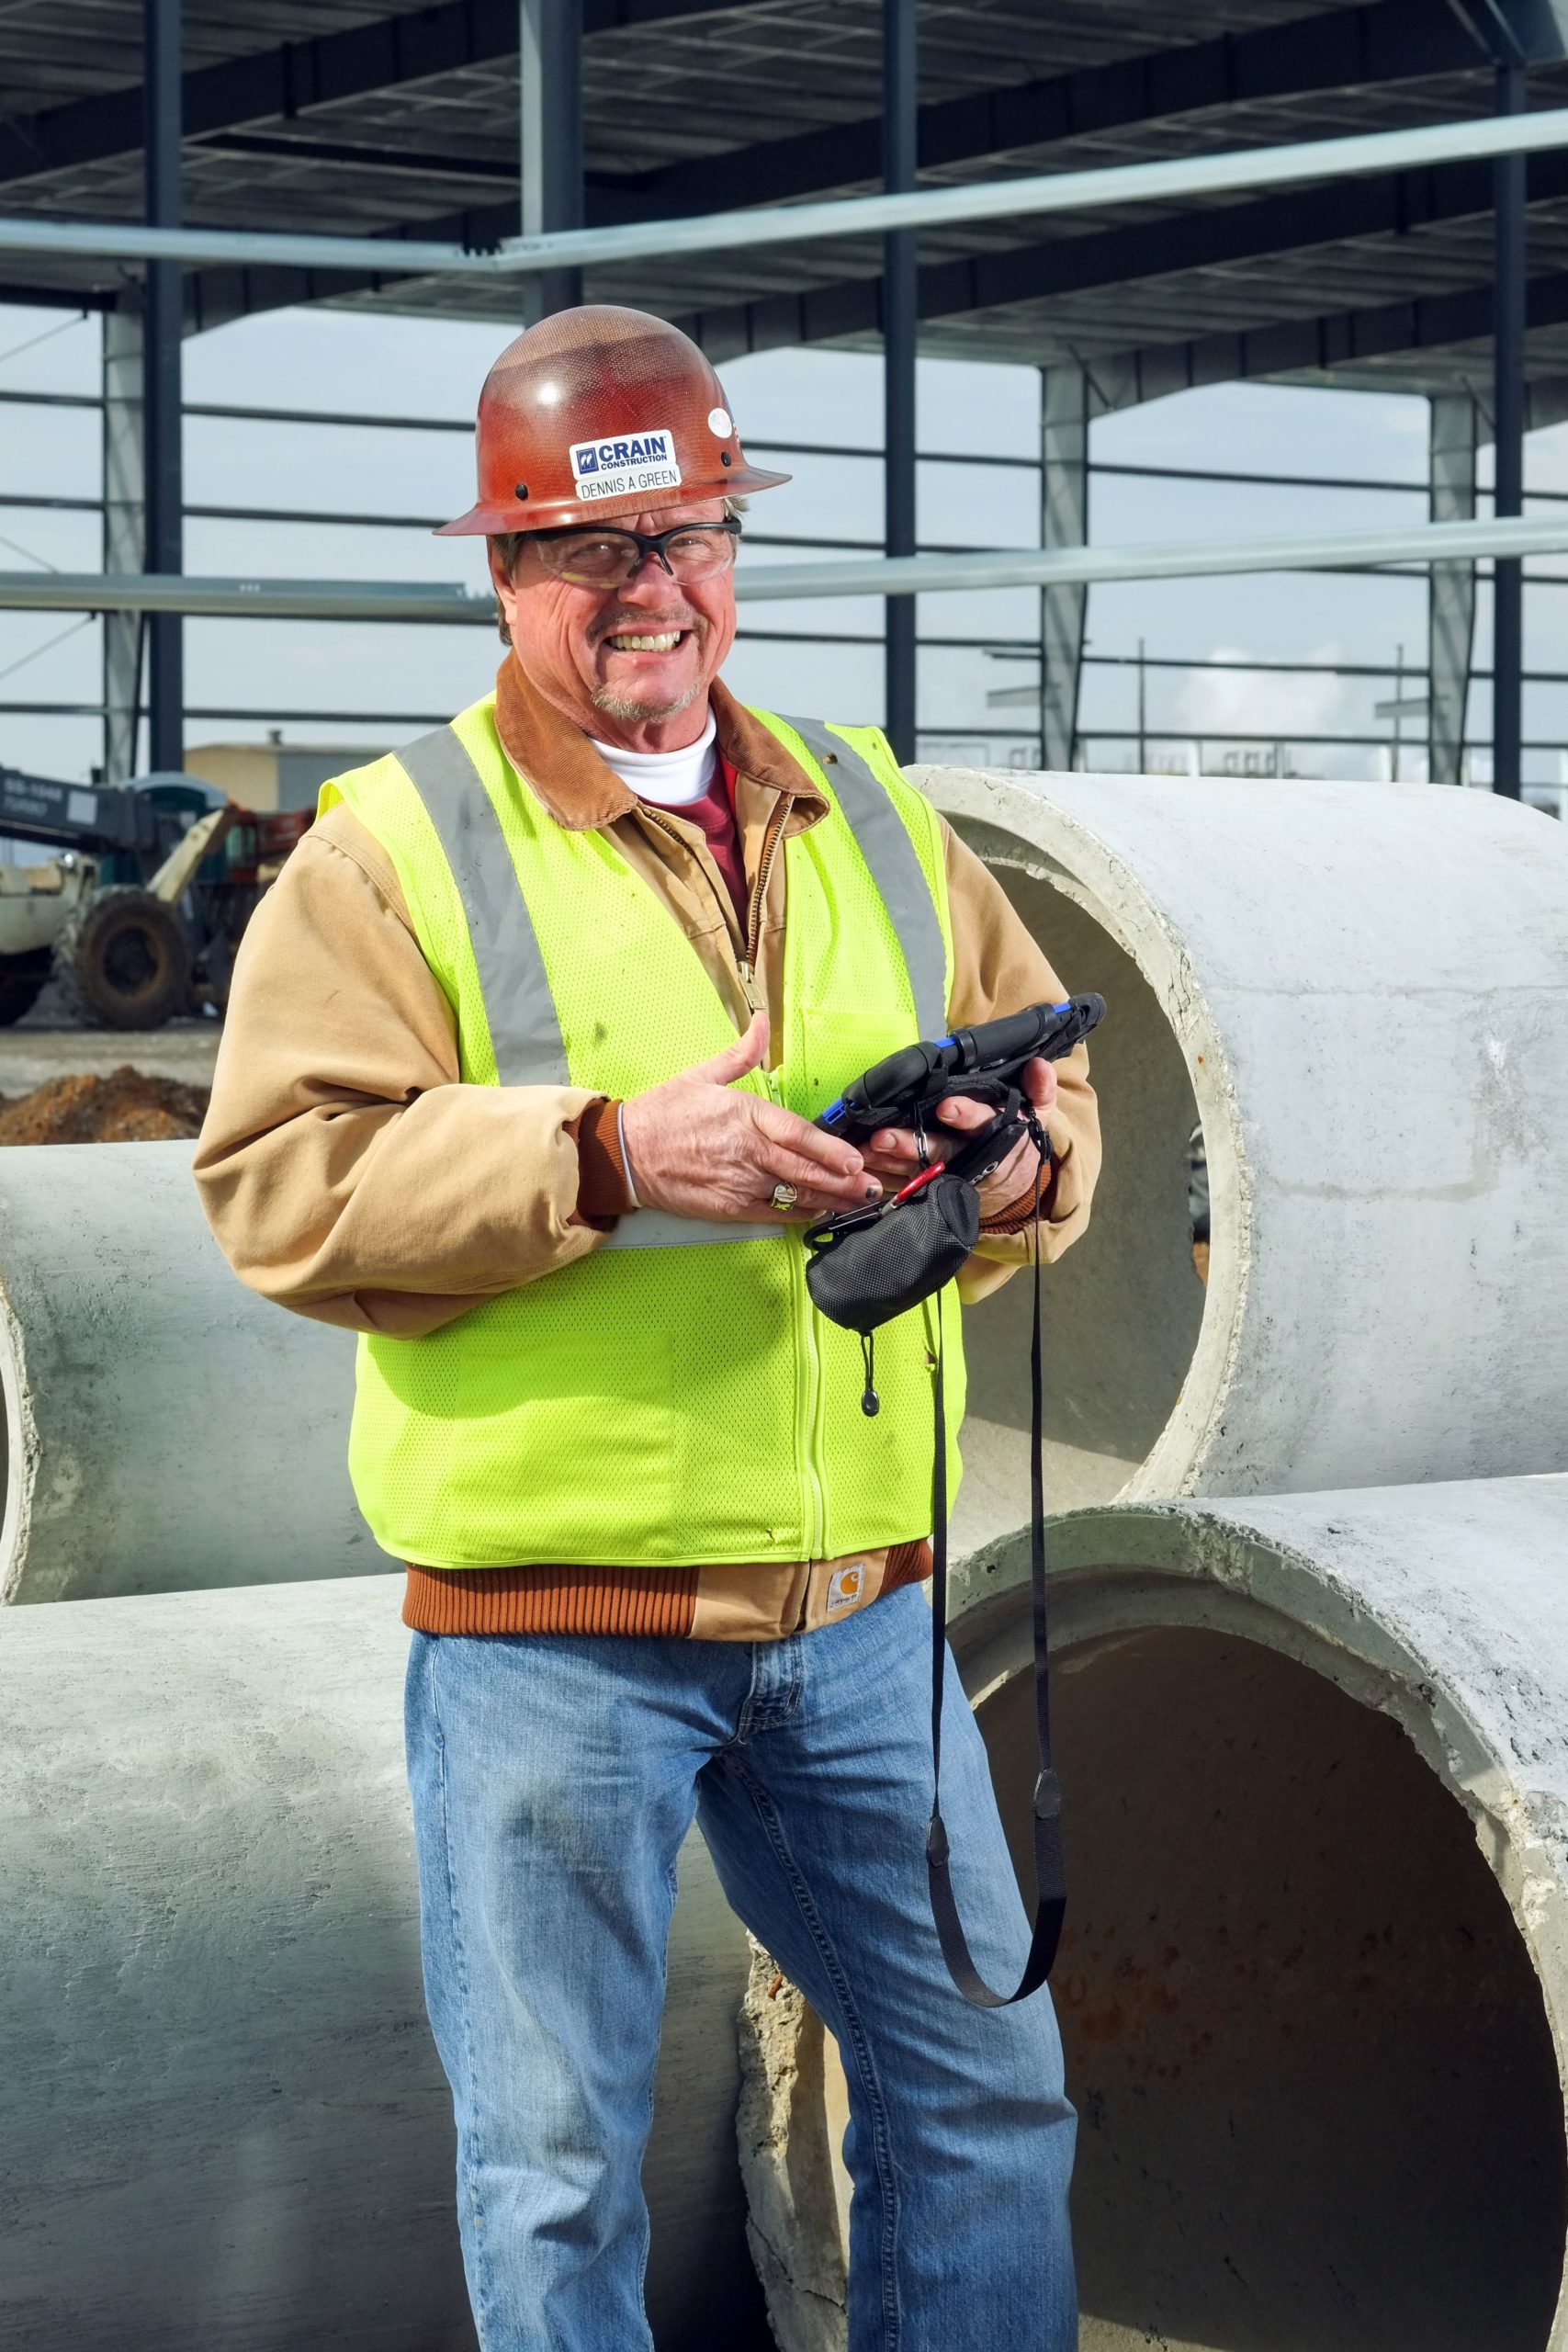 Crain employee smiling while holding an iPad on a construction site